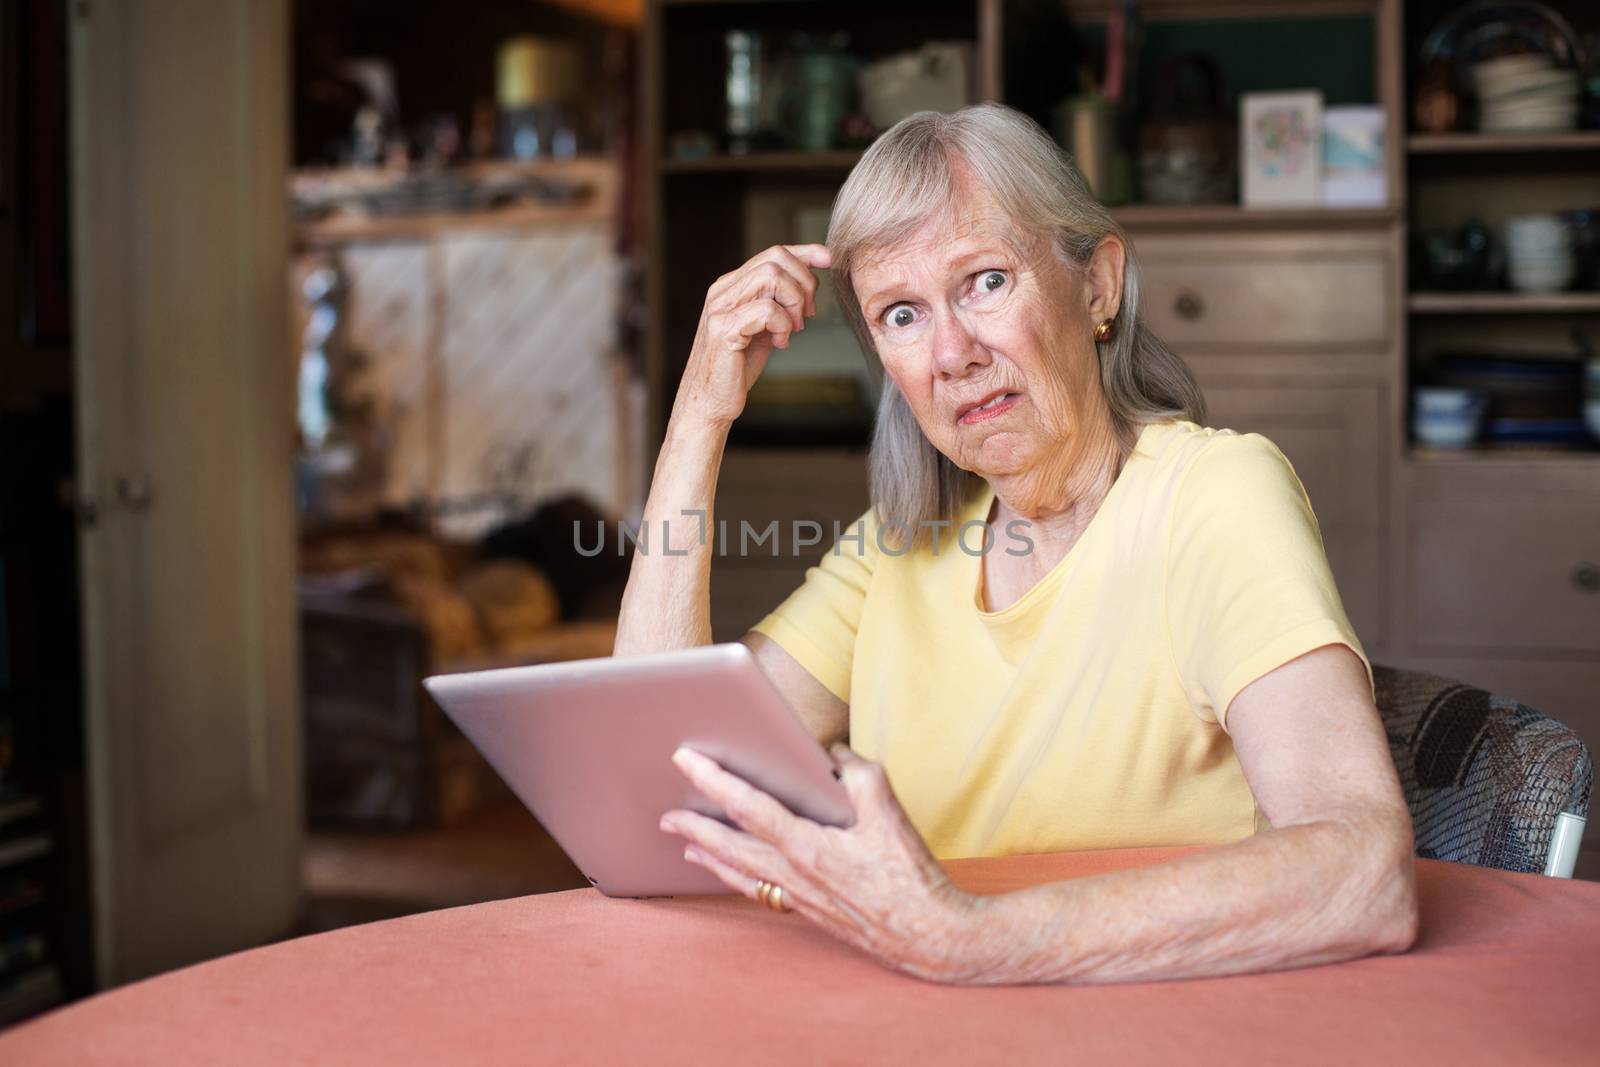 Single older female adult with confused expression holding tablet computer